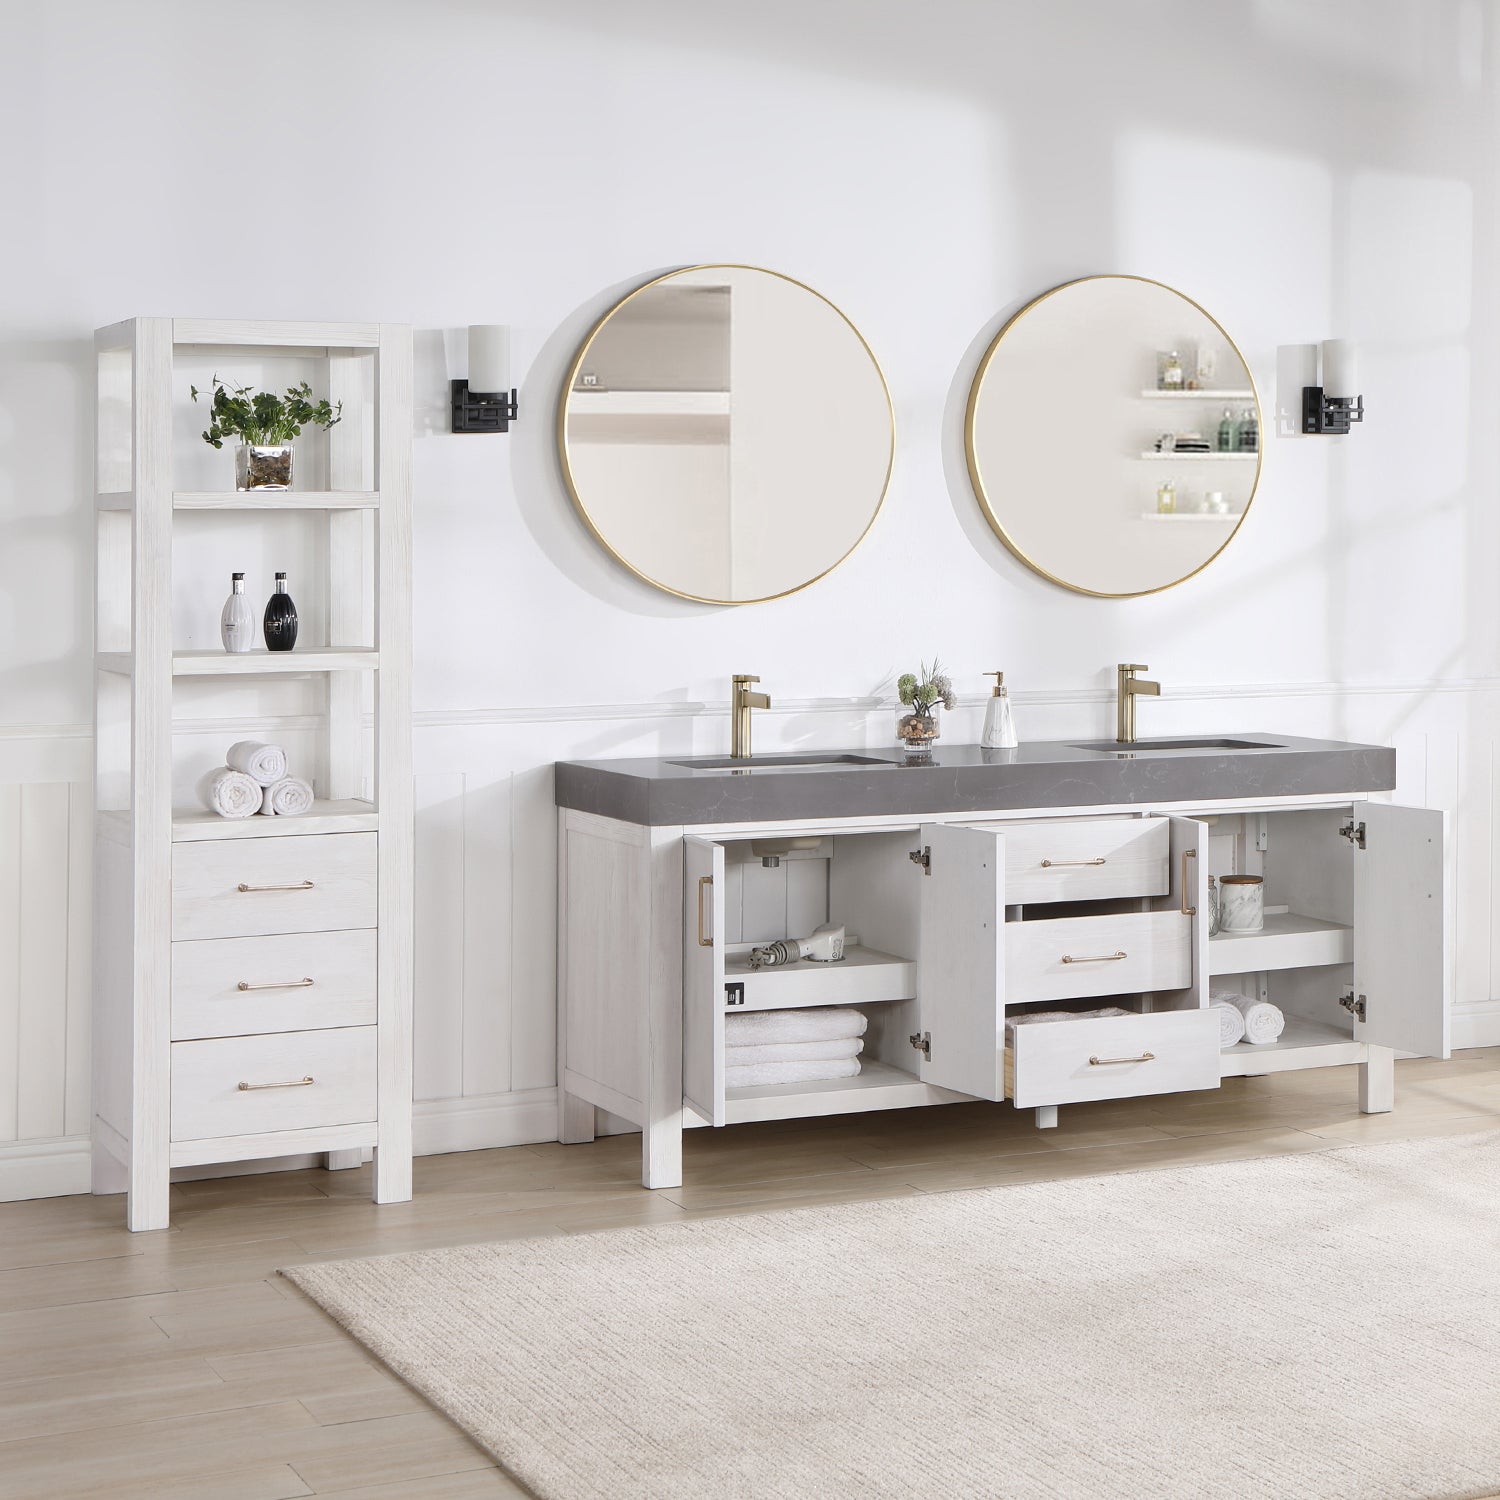 Vinnova Design León 72in. Free standing Double Bathroom Vanity in Fir Wood White with Composite top in Reticulated Grey - New Star Living